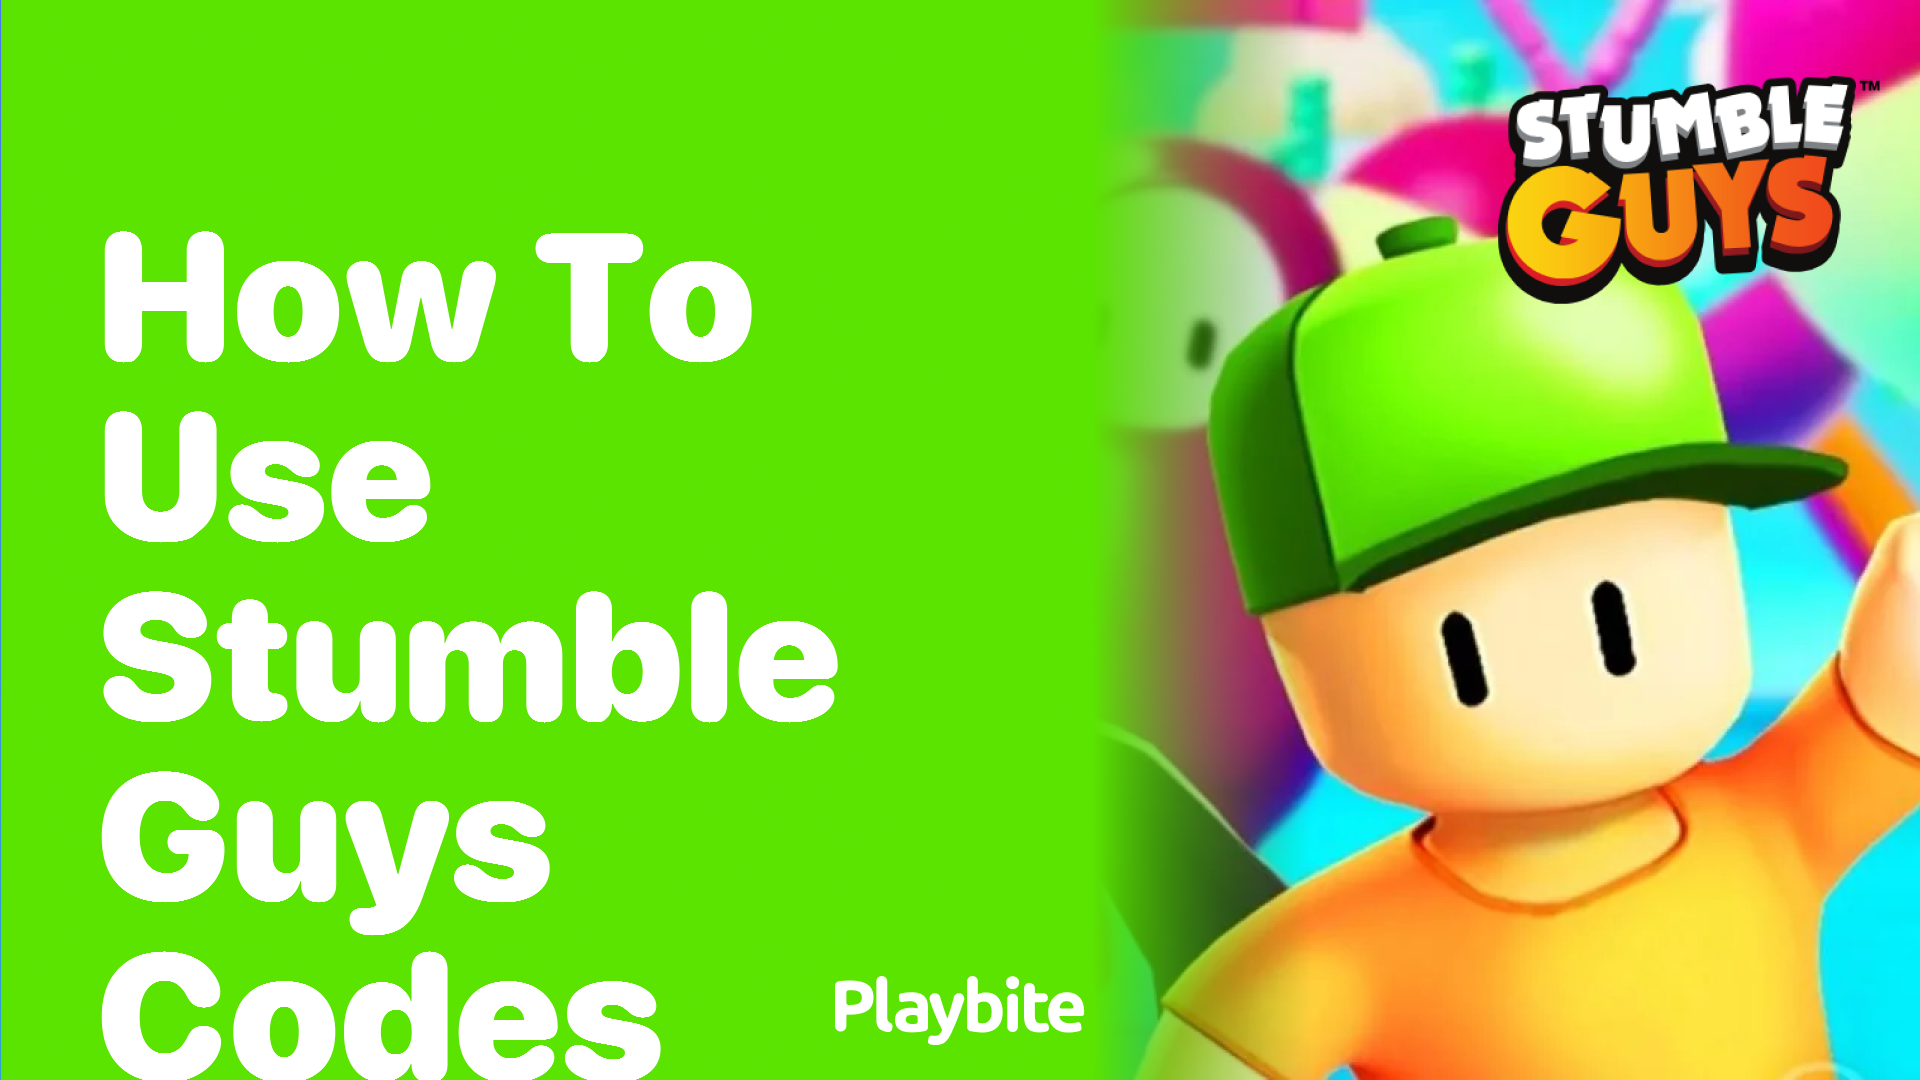 How to Use Stumble Guys Codes